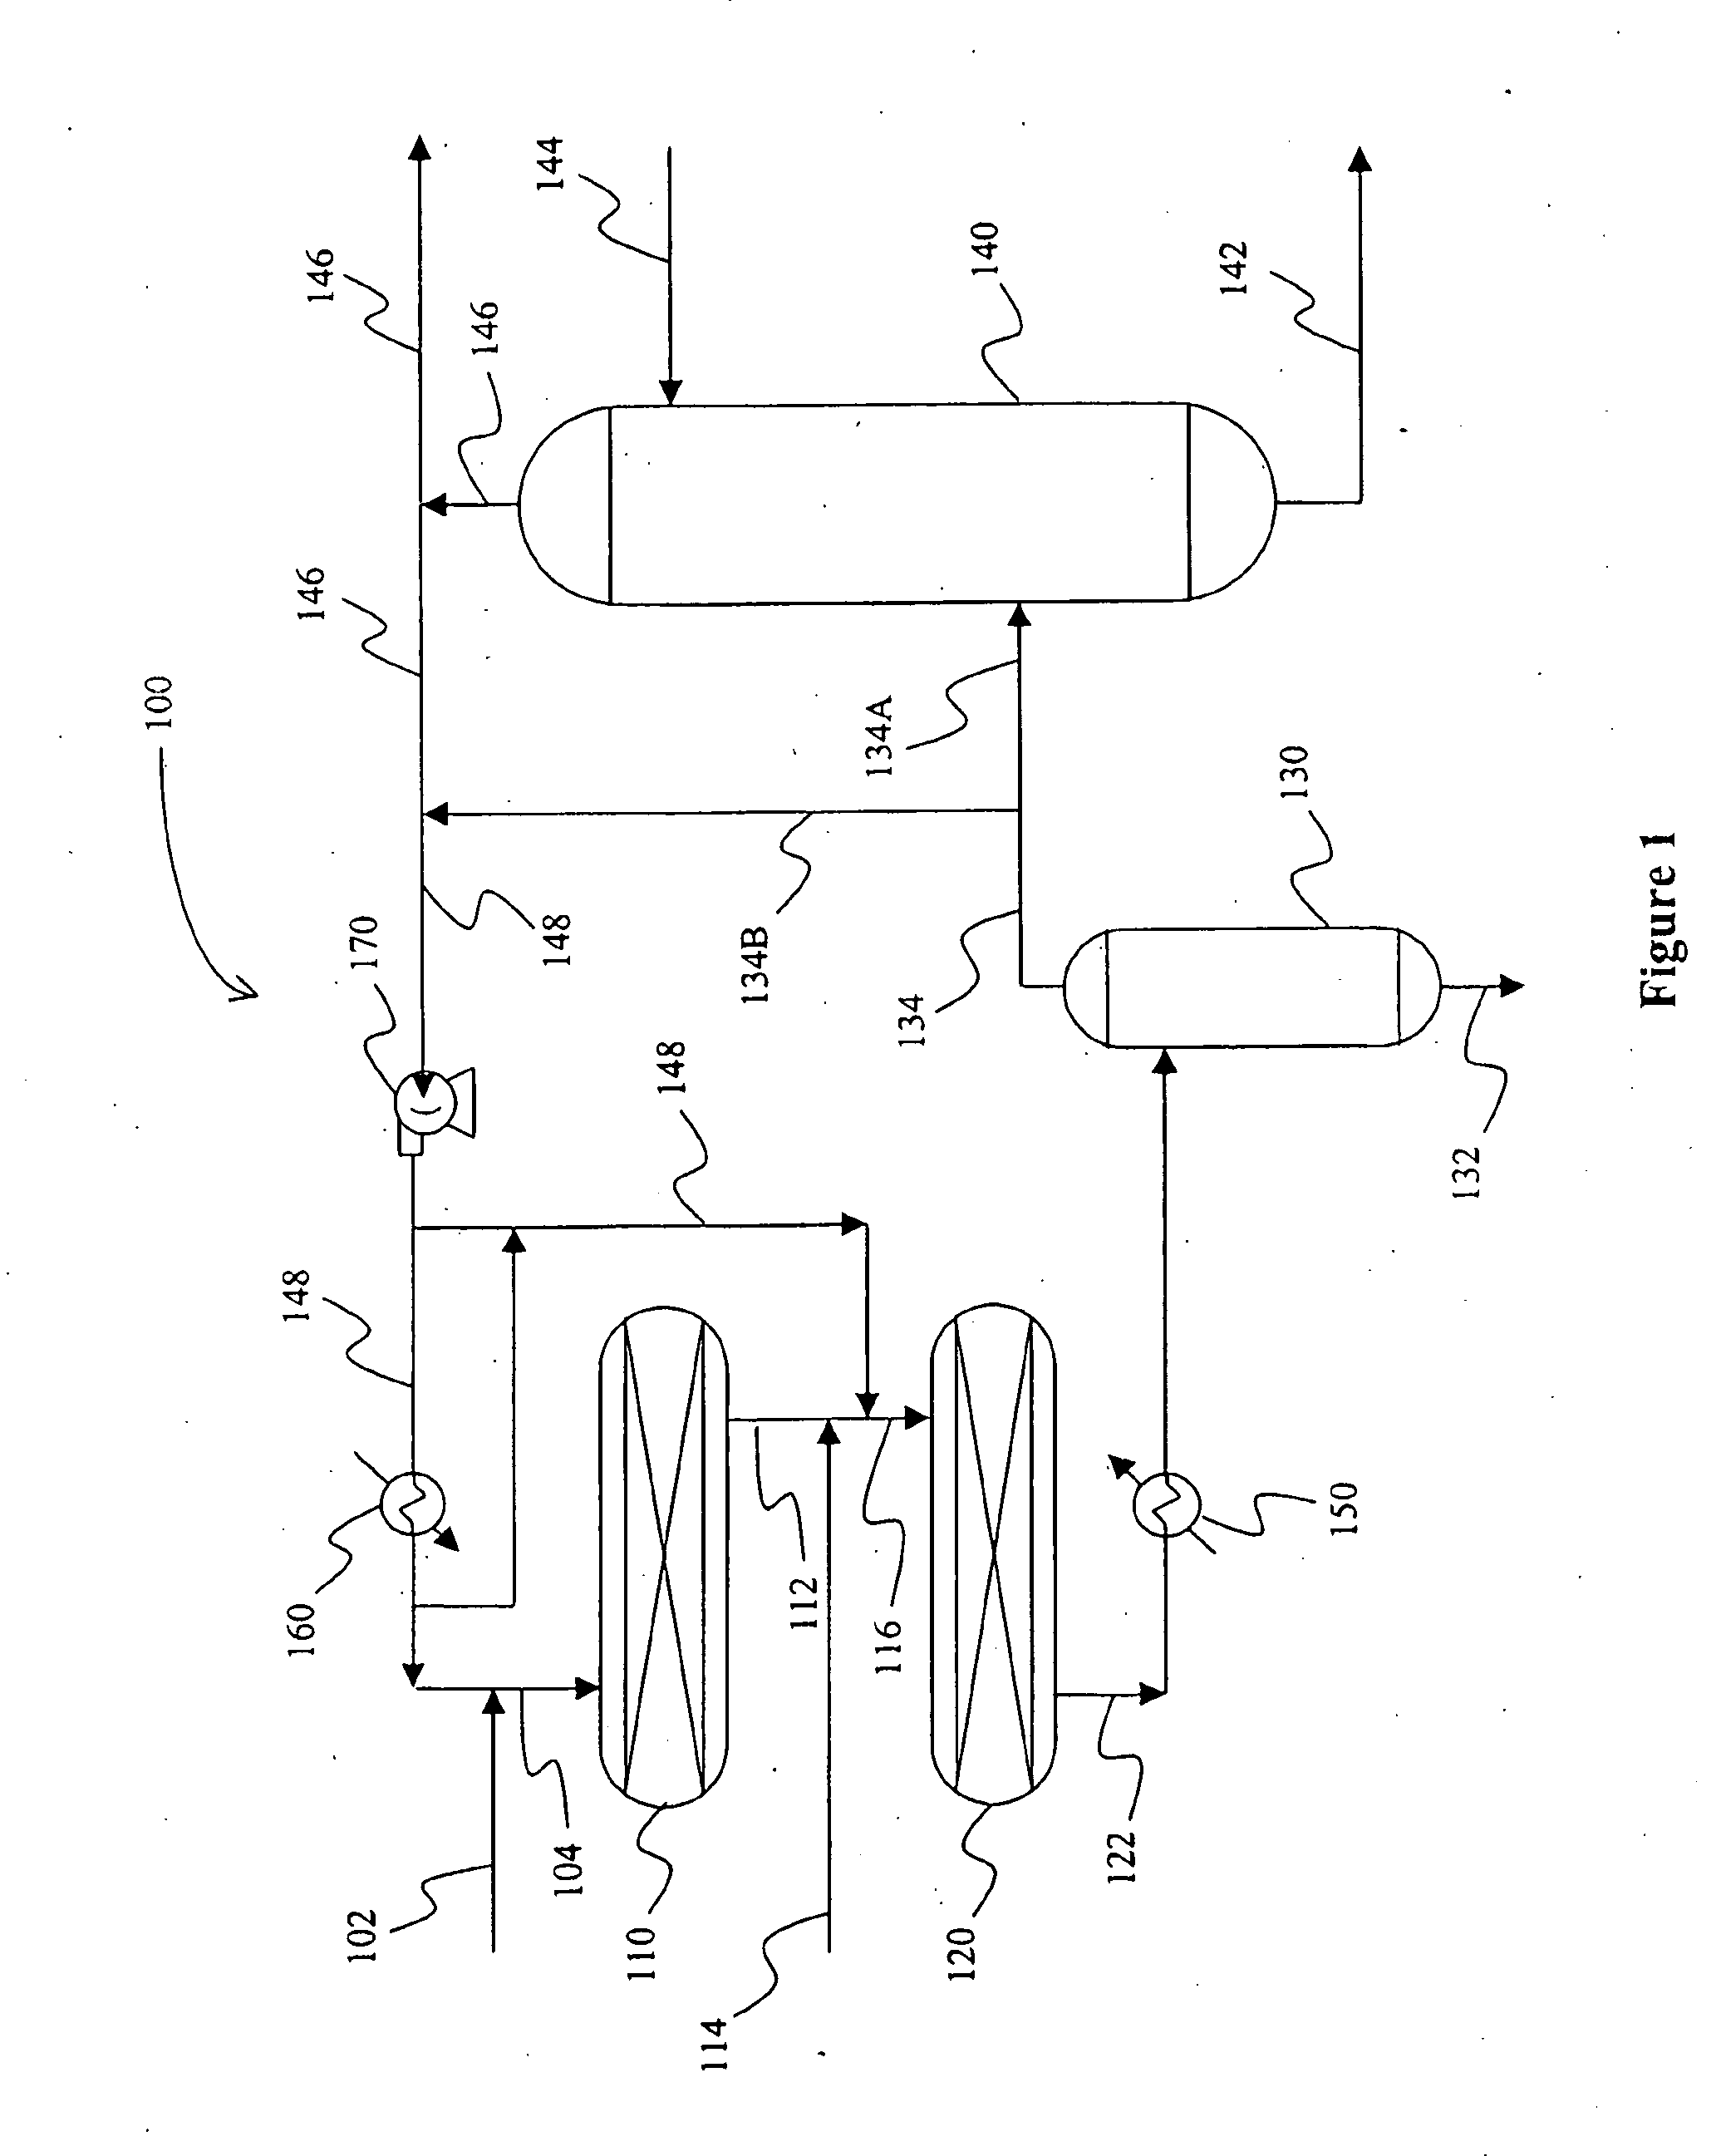 Configurations and Methods for Effluent Gas Treatment